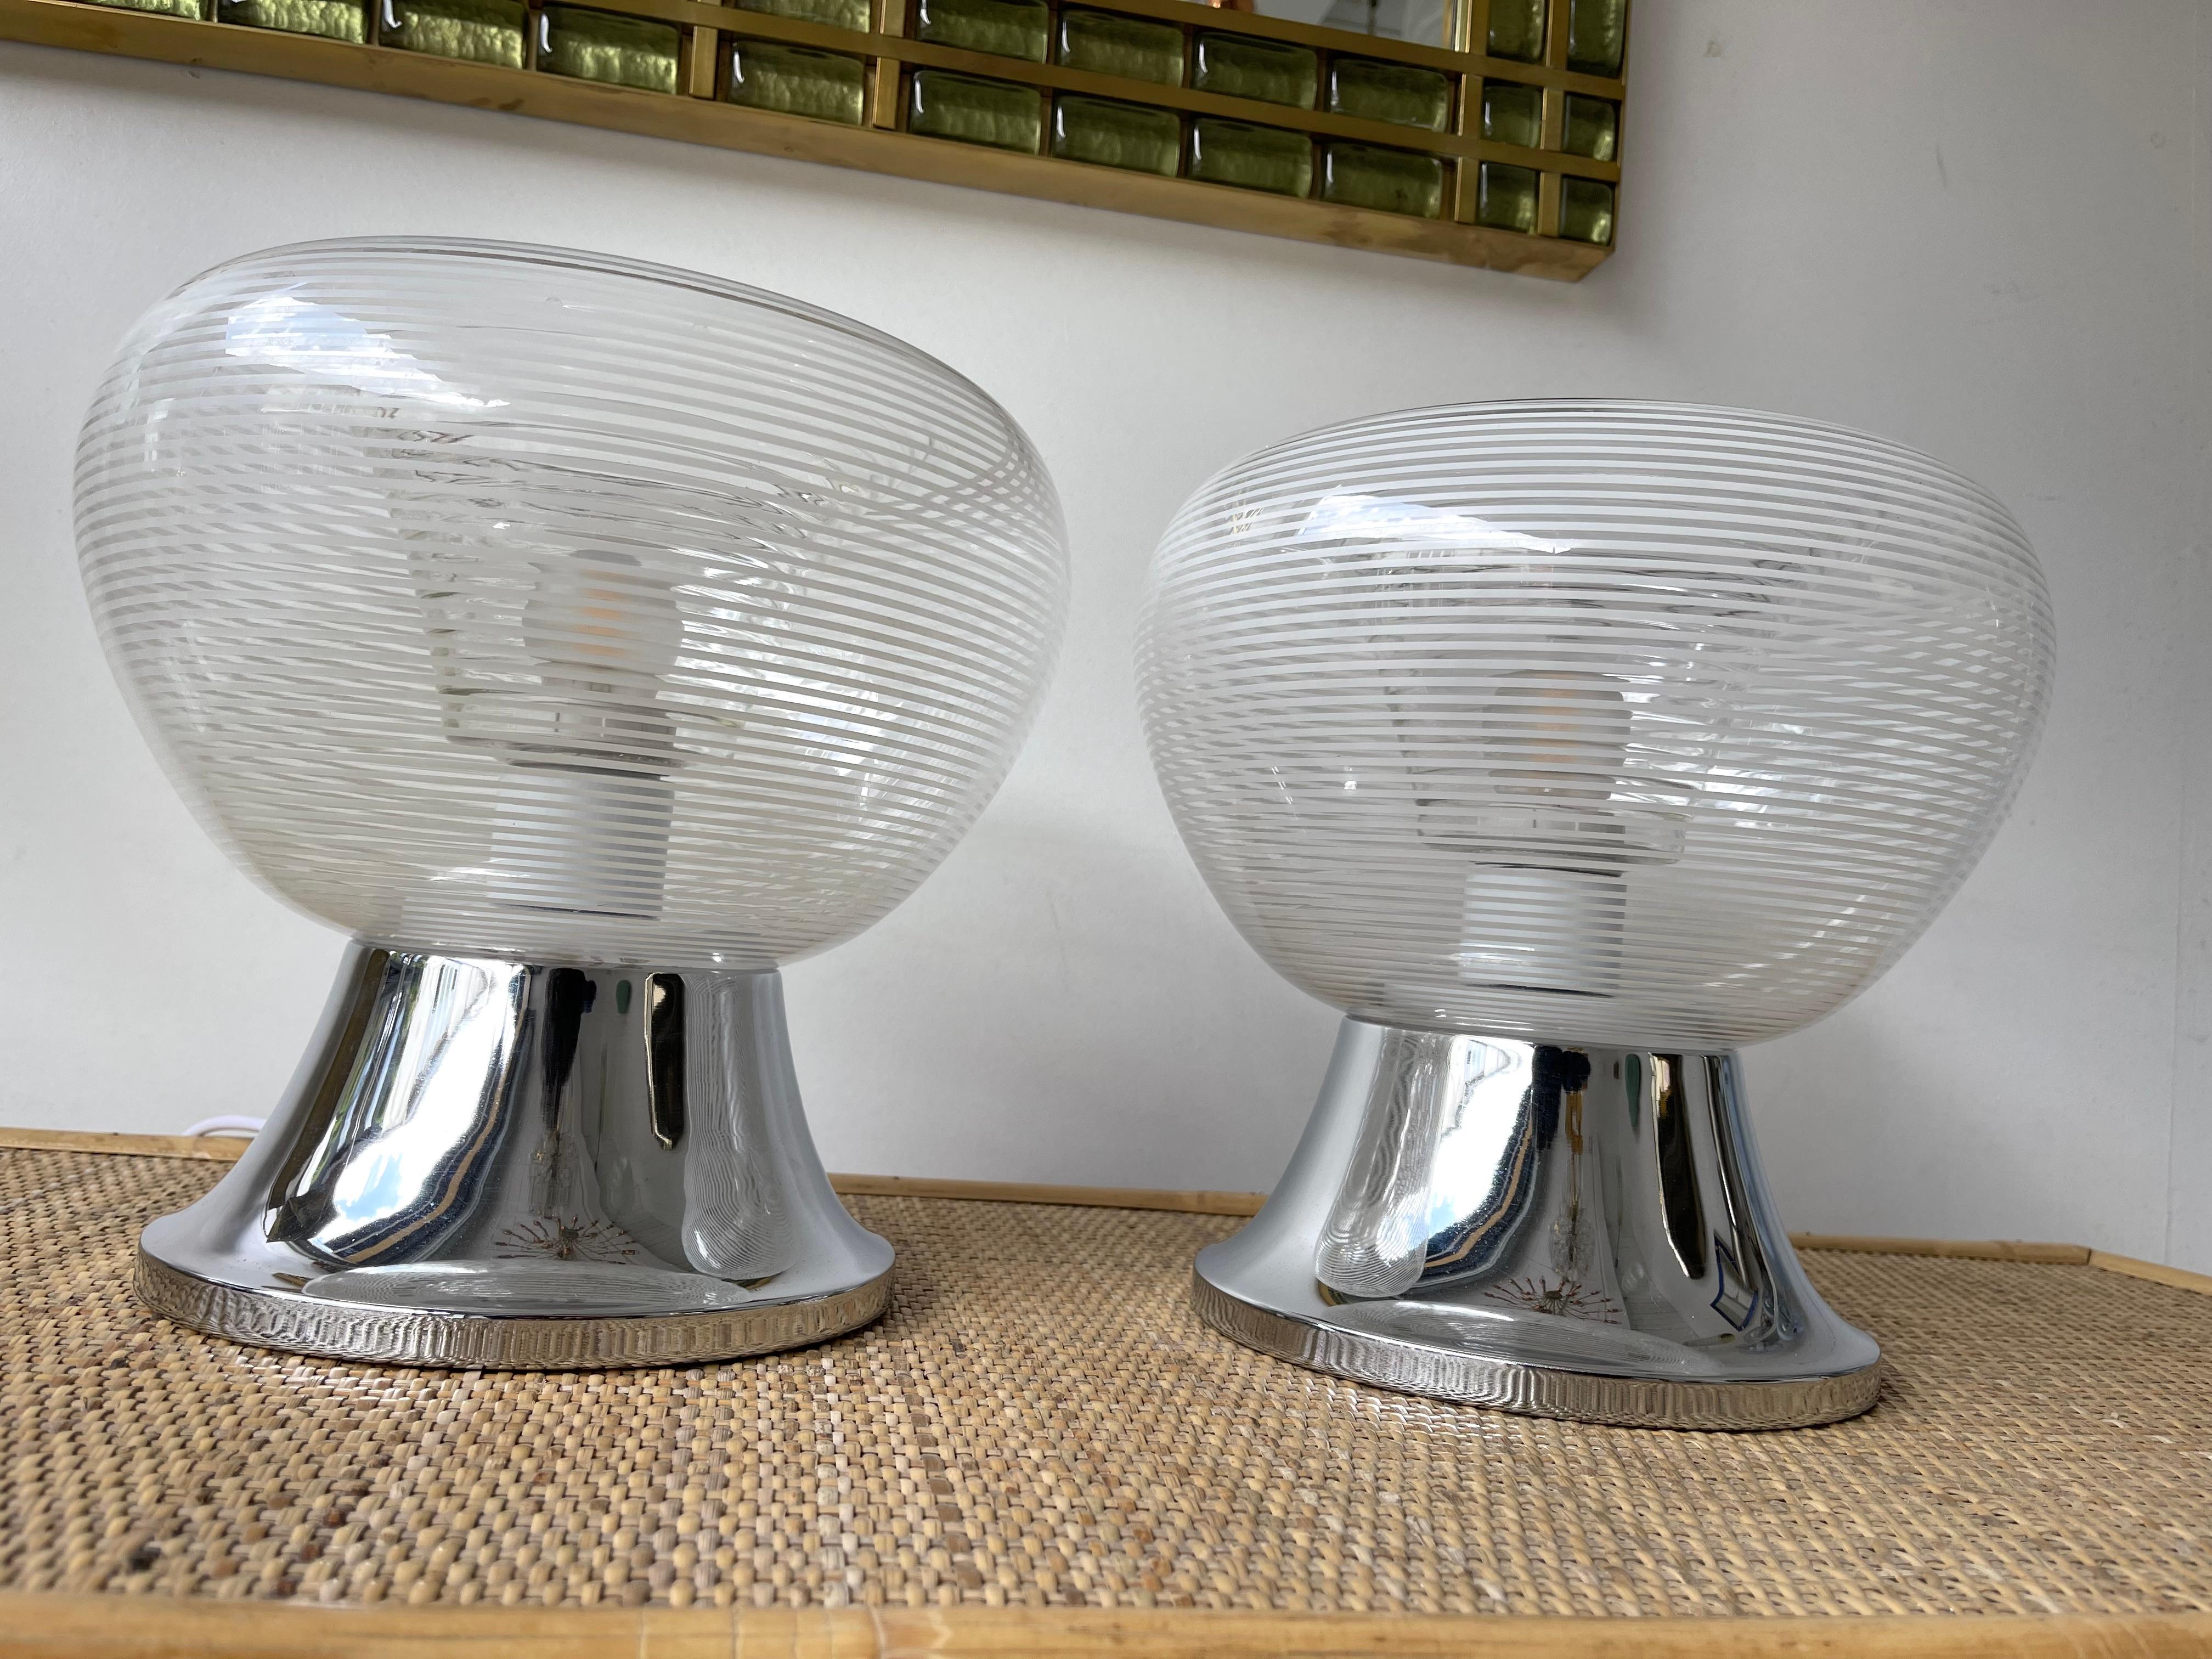 Pair of Stripe Murano Glass and Metal Chrome Lamps by VeArt, Italy, 1970s For Sale 6